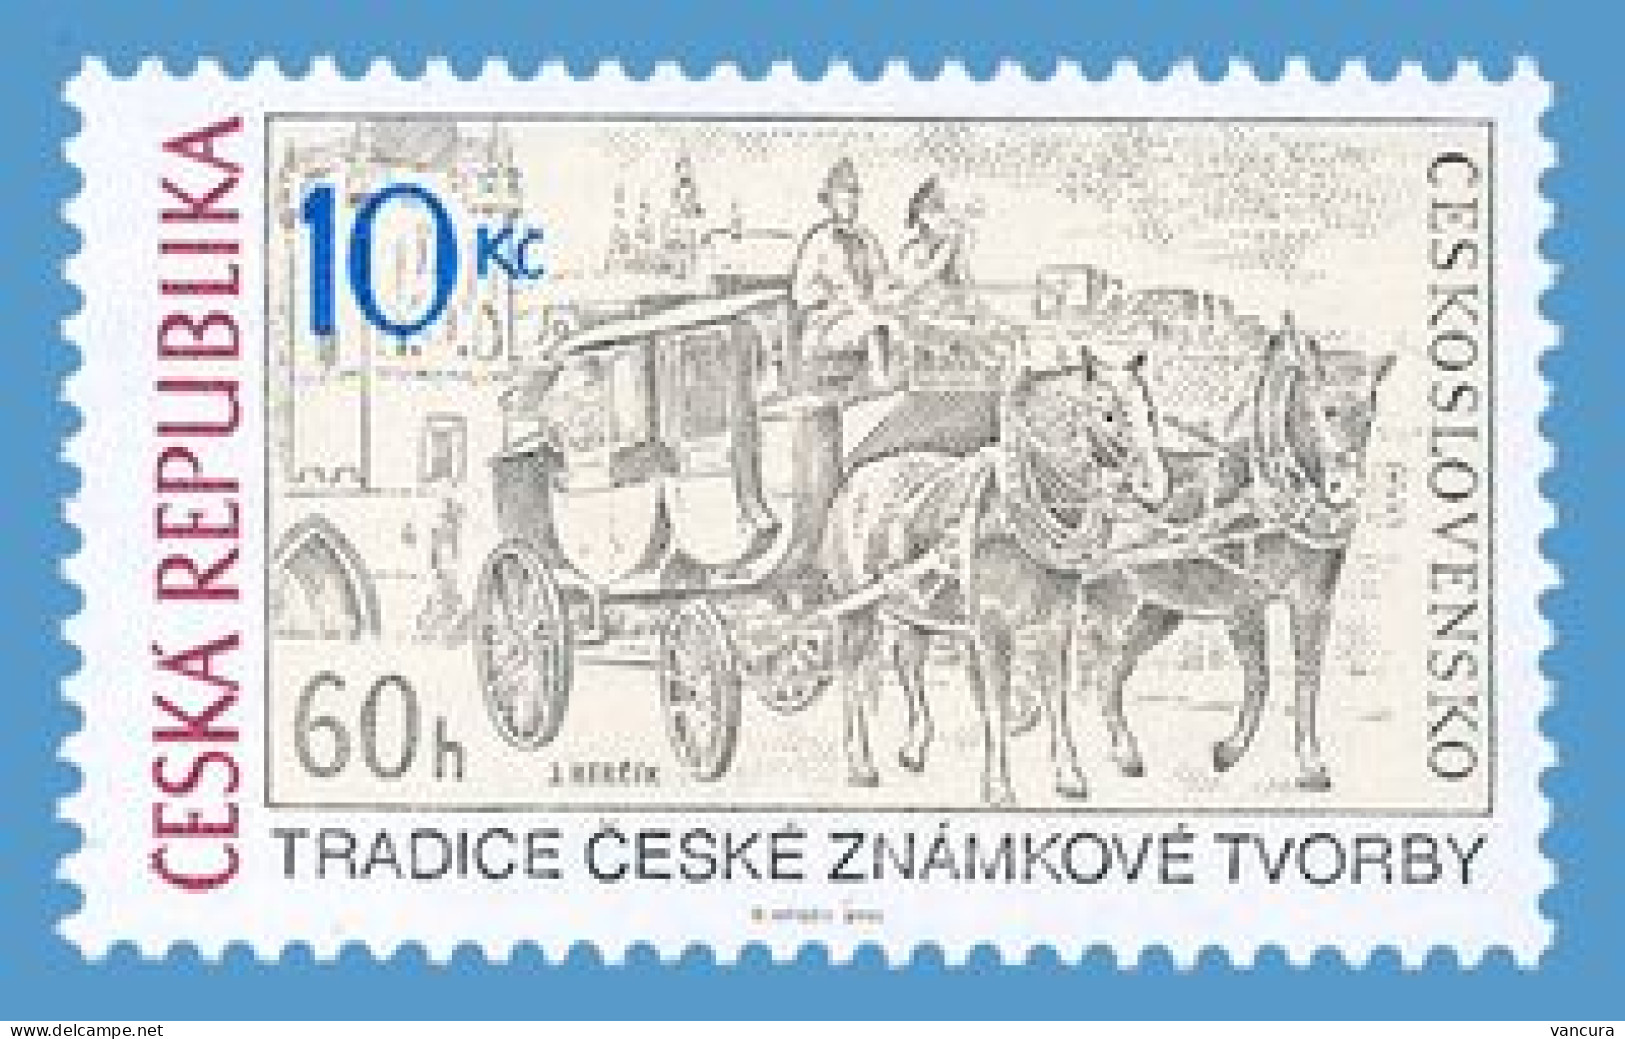 ** 667 Czech Republic Traditions Of The Stamp Design - Hercik's Coach On The Charles Bridge  2011 - Stage-Coaches